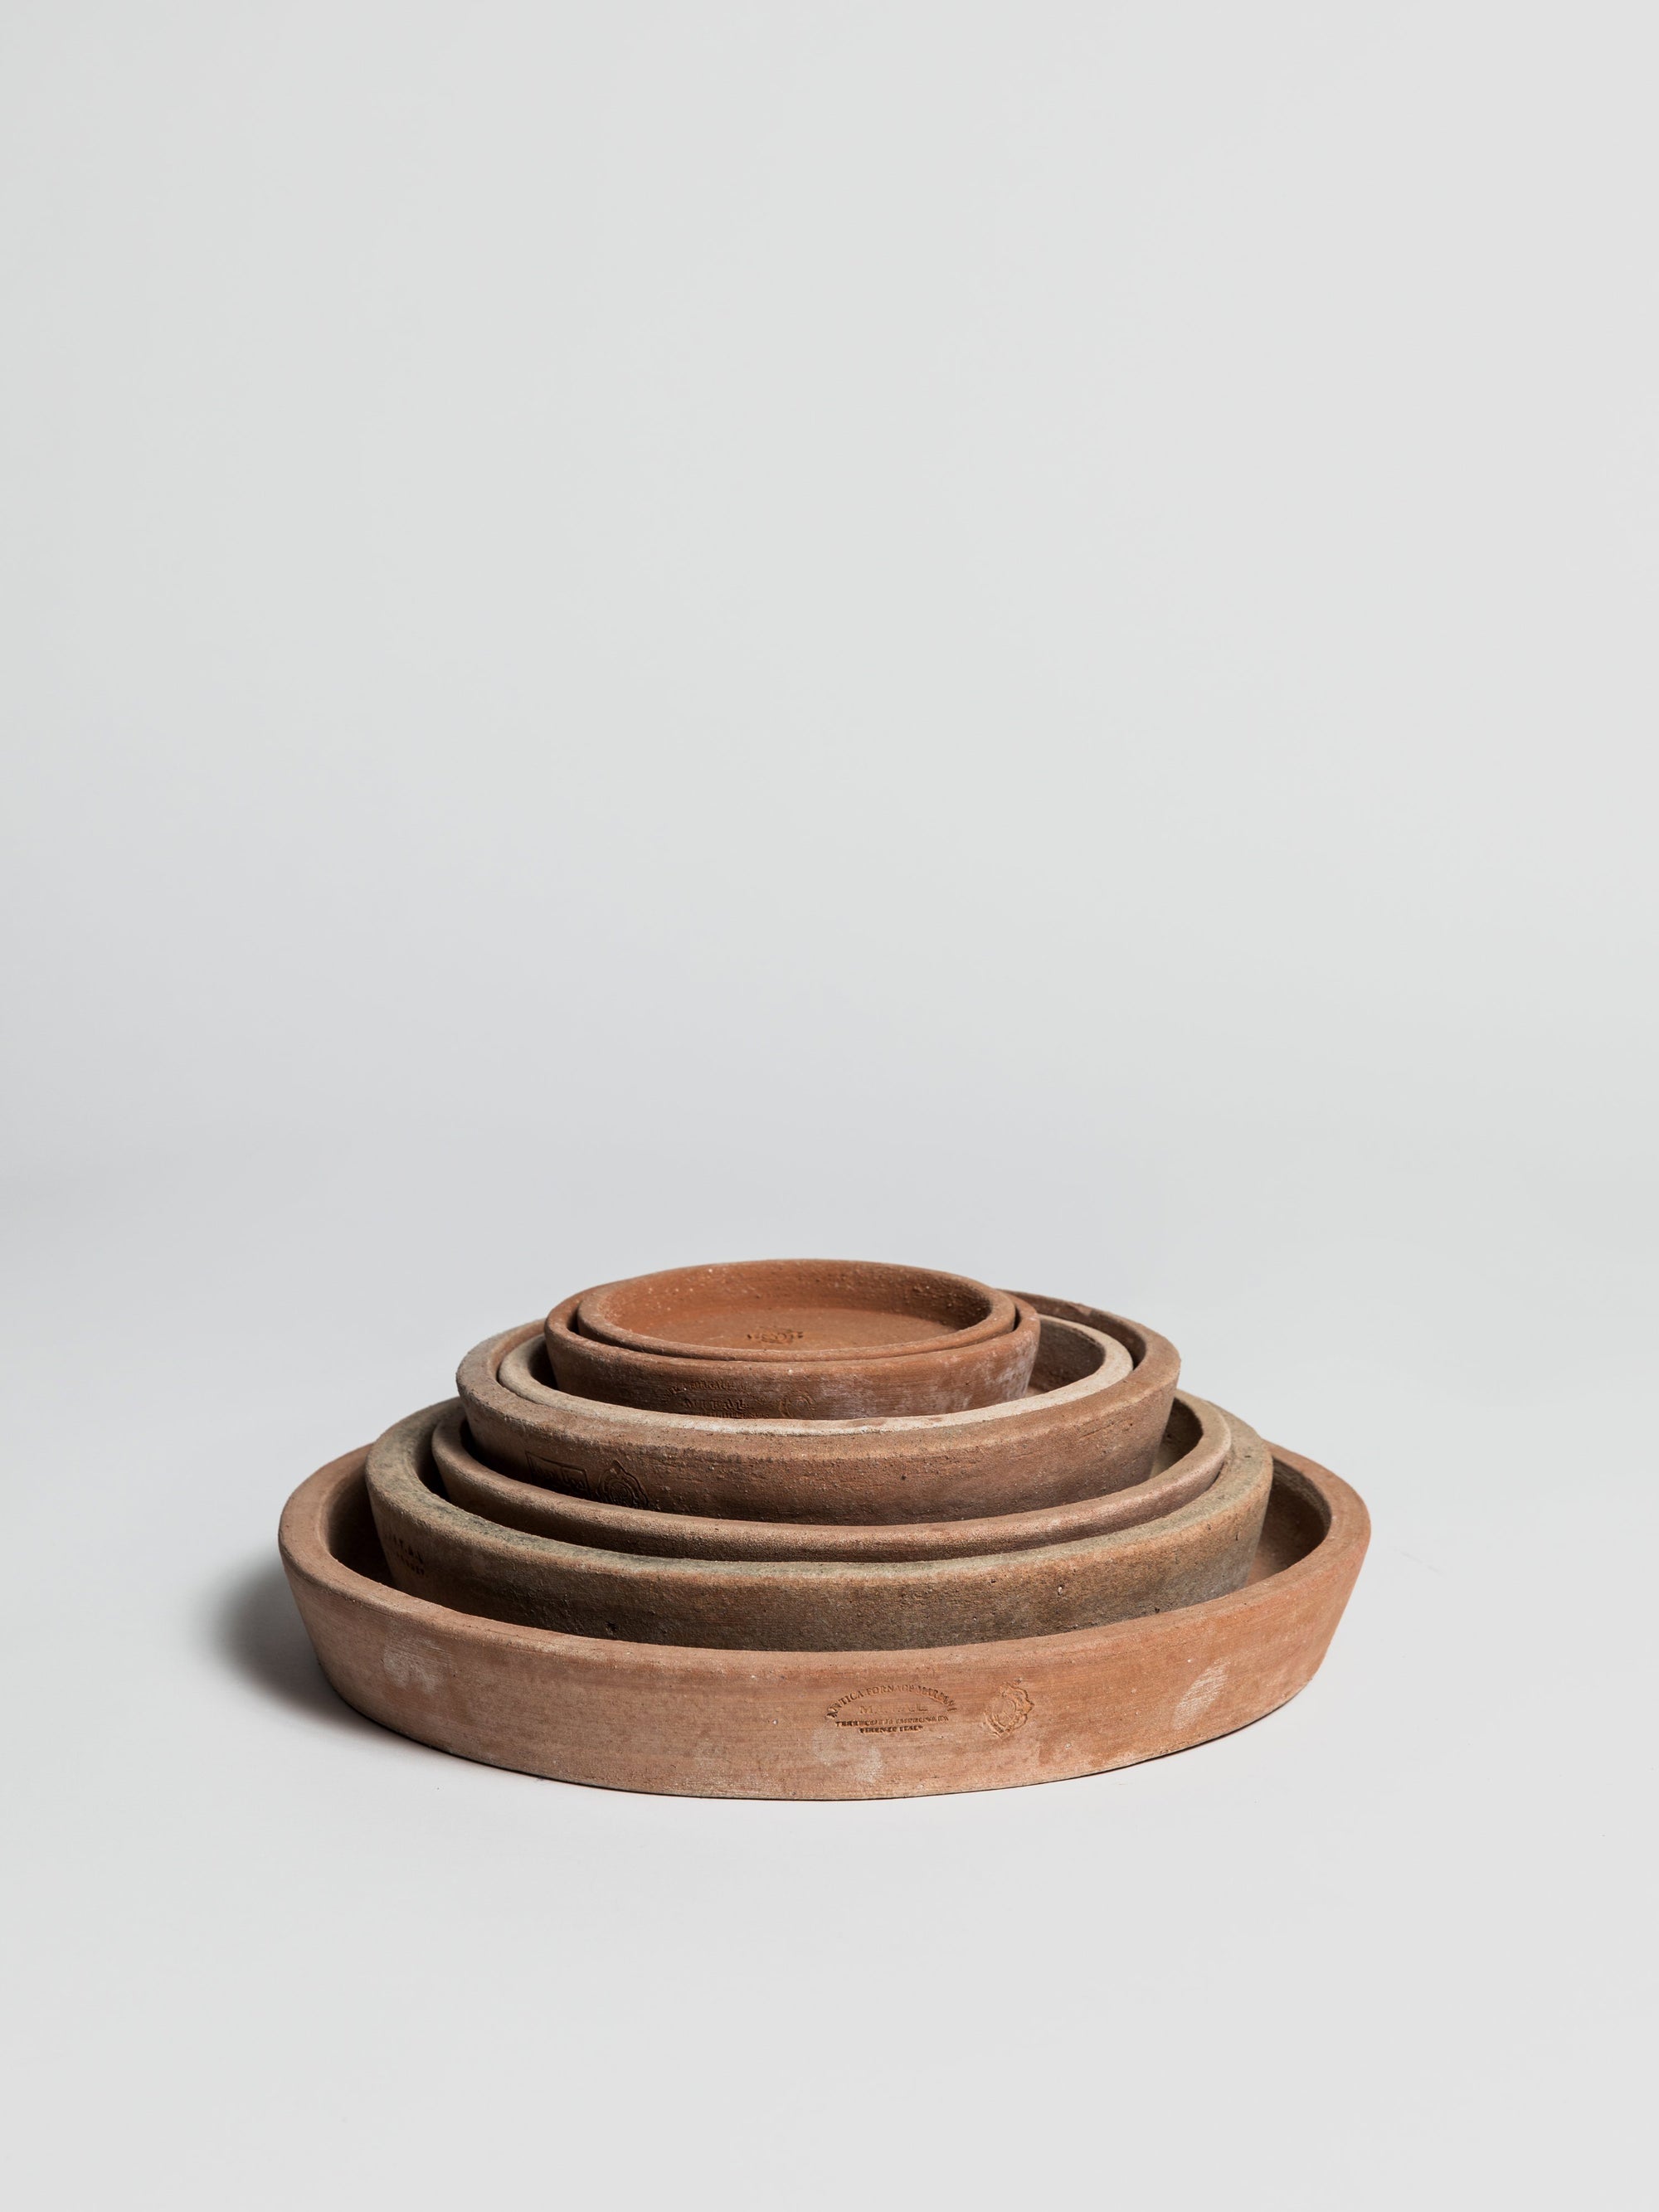 Mital Saucer Terracotta (without rim) Saucer M.I.T.A.L 